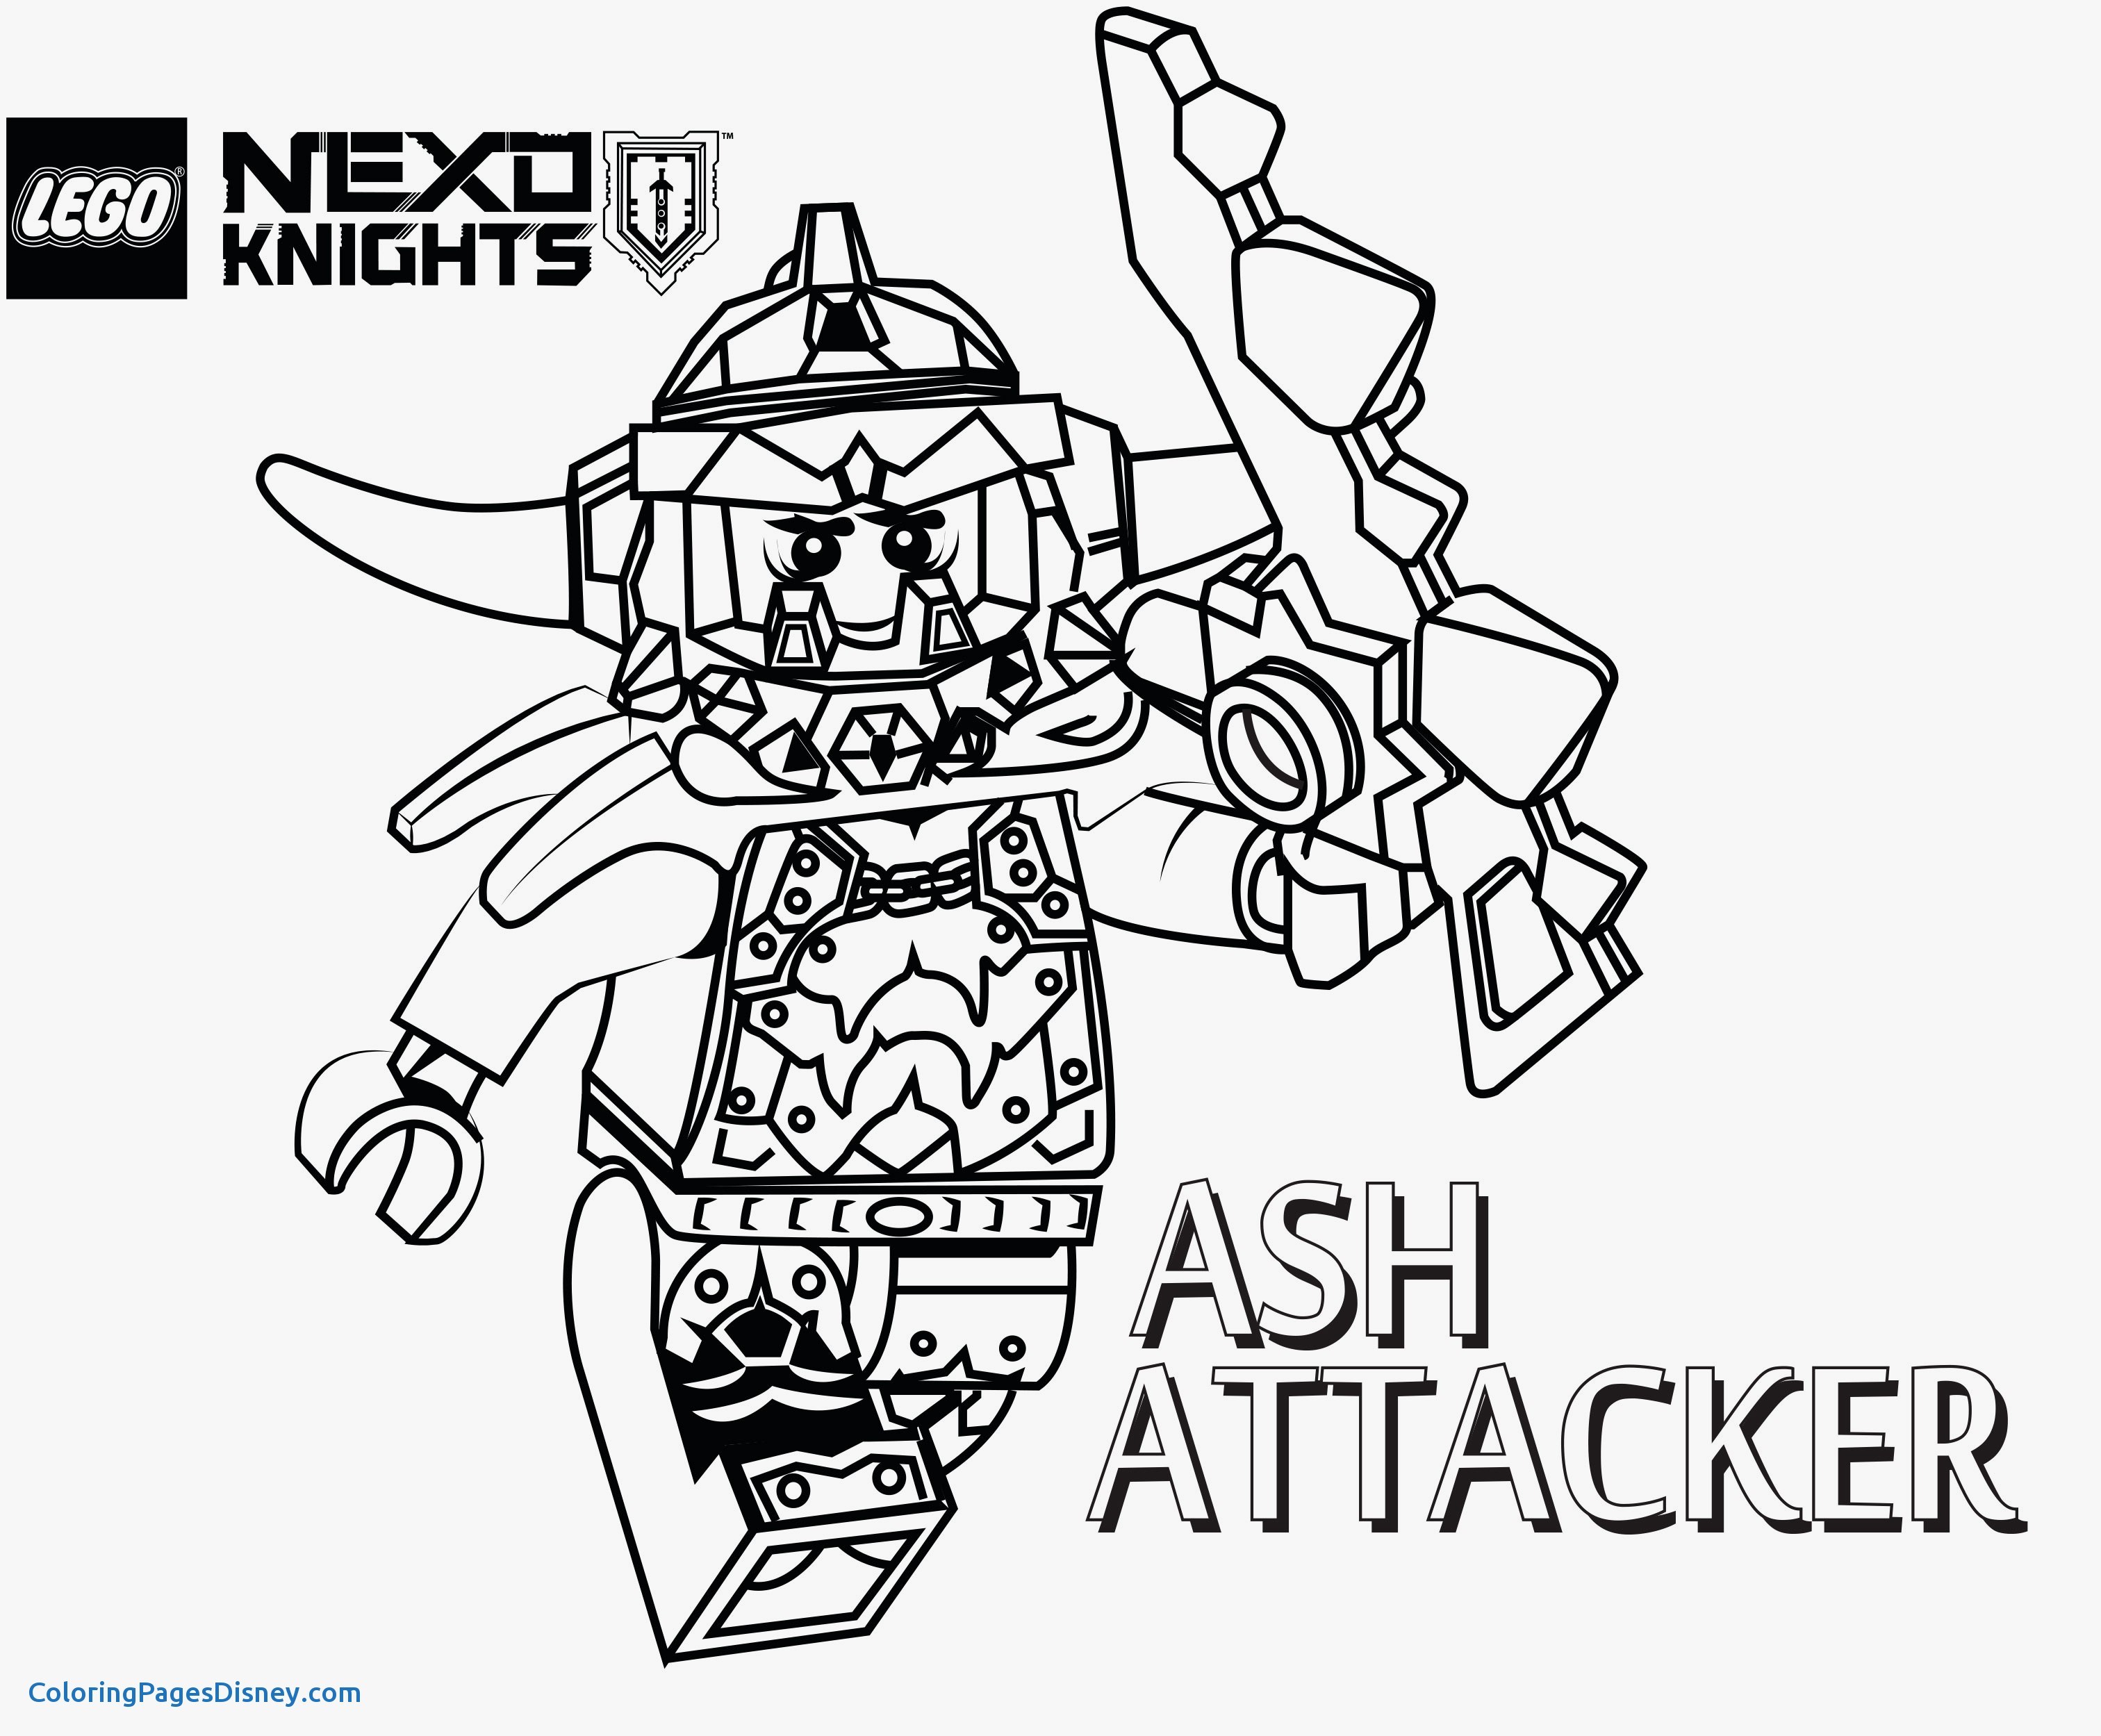 nexo knight coloring pages at getcolorings  free